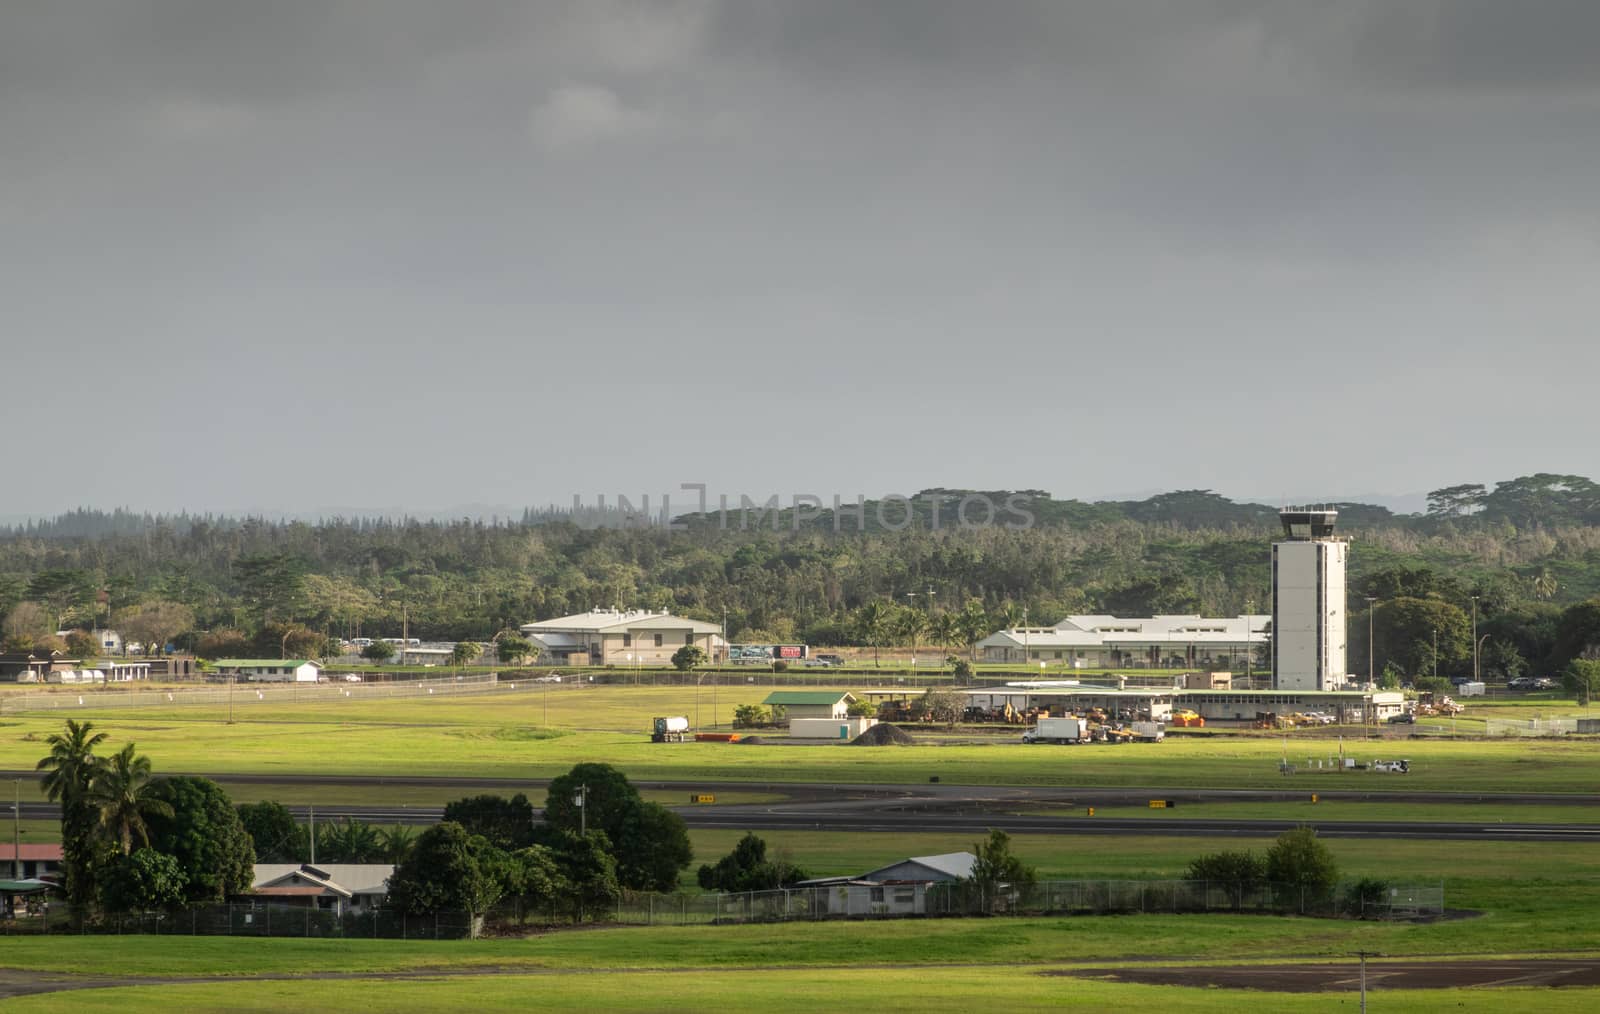 Hilo, Hawaii, USA. - January 14, 2020: Green airport with white control tower and buildings under dark rainty sky. Forest on horizon. Farm up front.